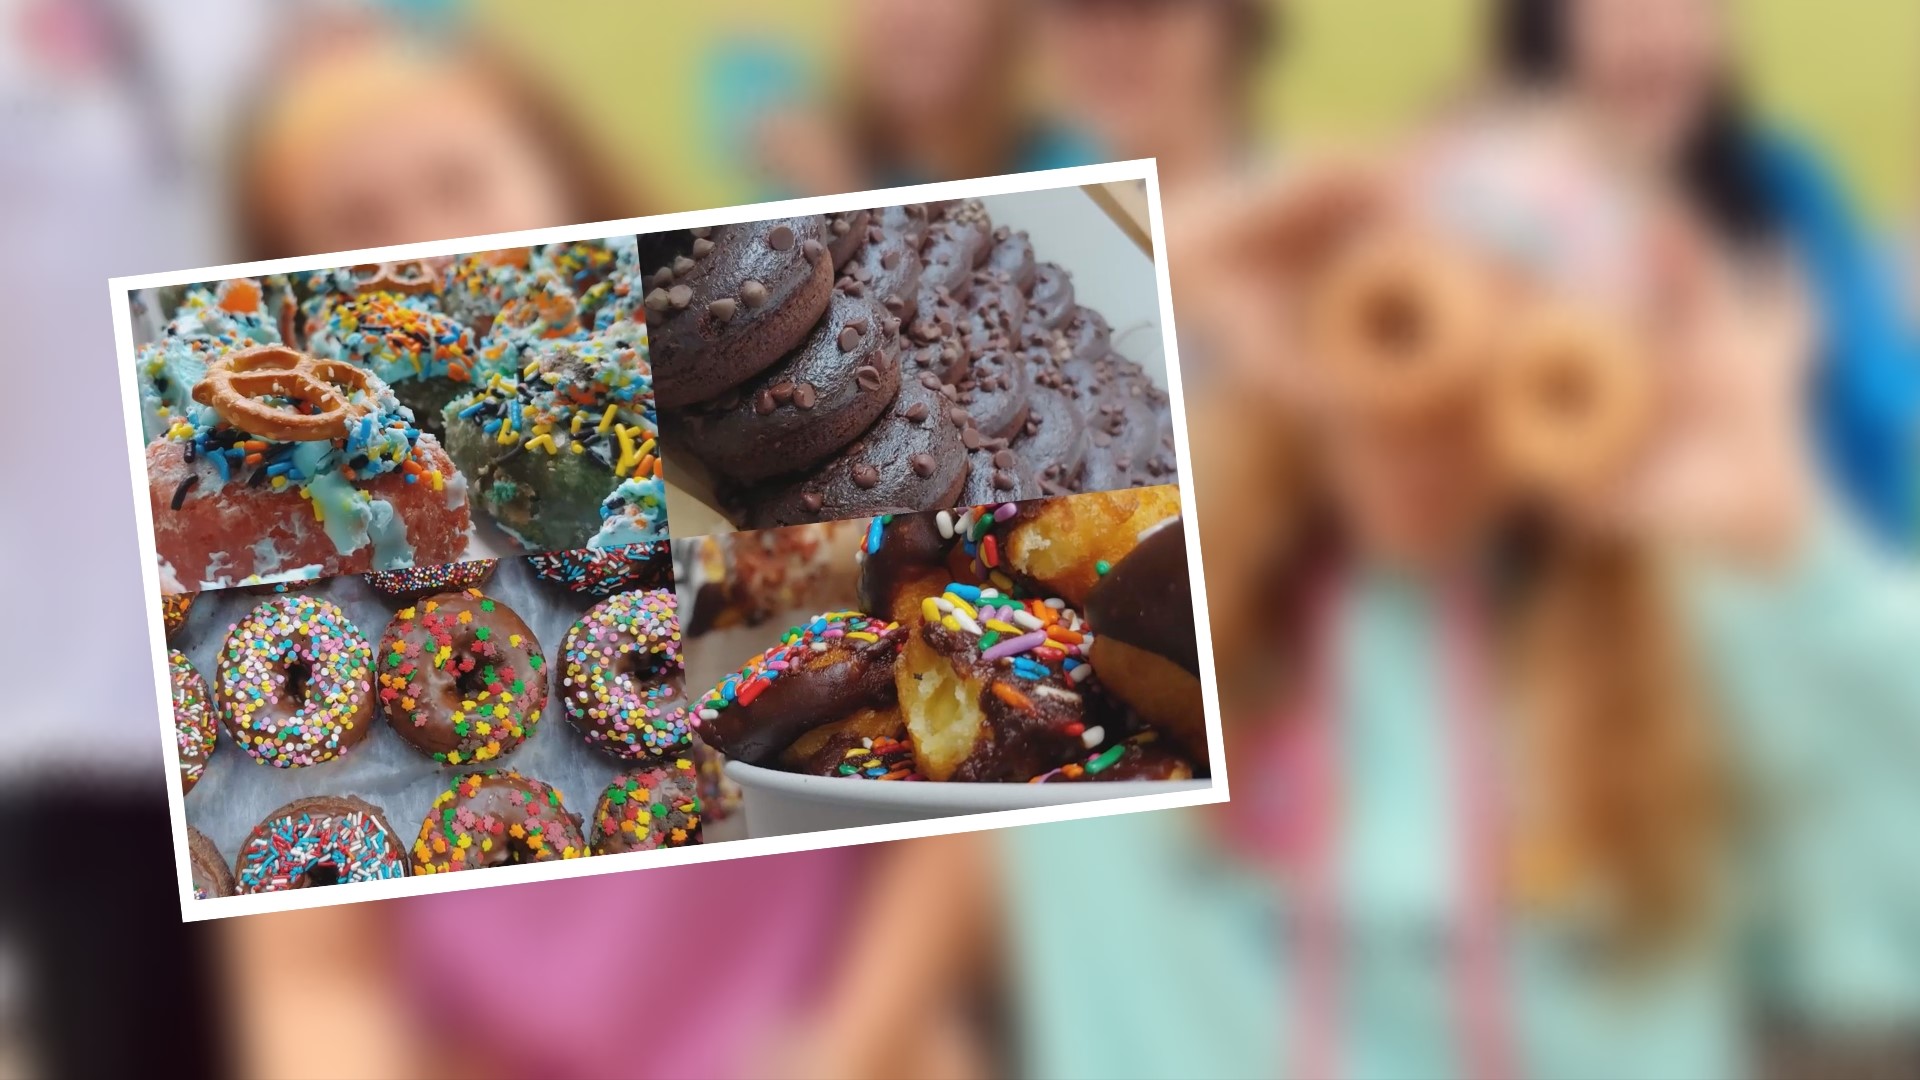 Organizers of a unique event are saying "donut worry, beer happy" as they bring the festivities to Grand Rapids.